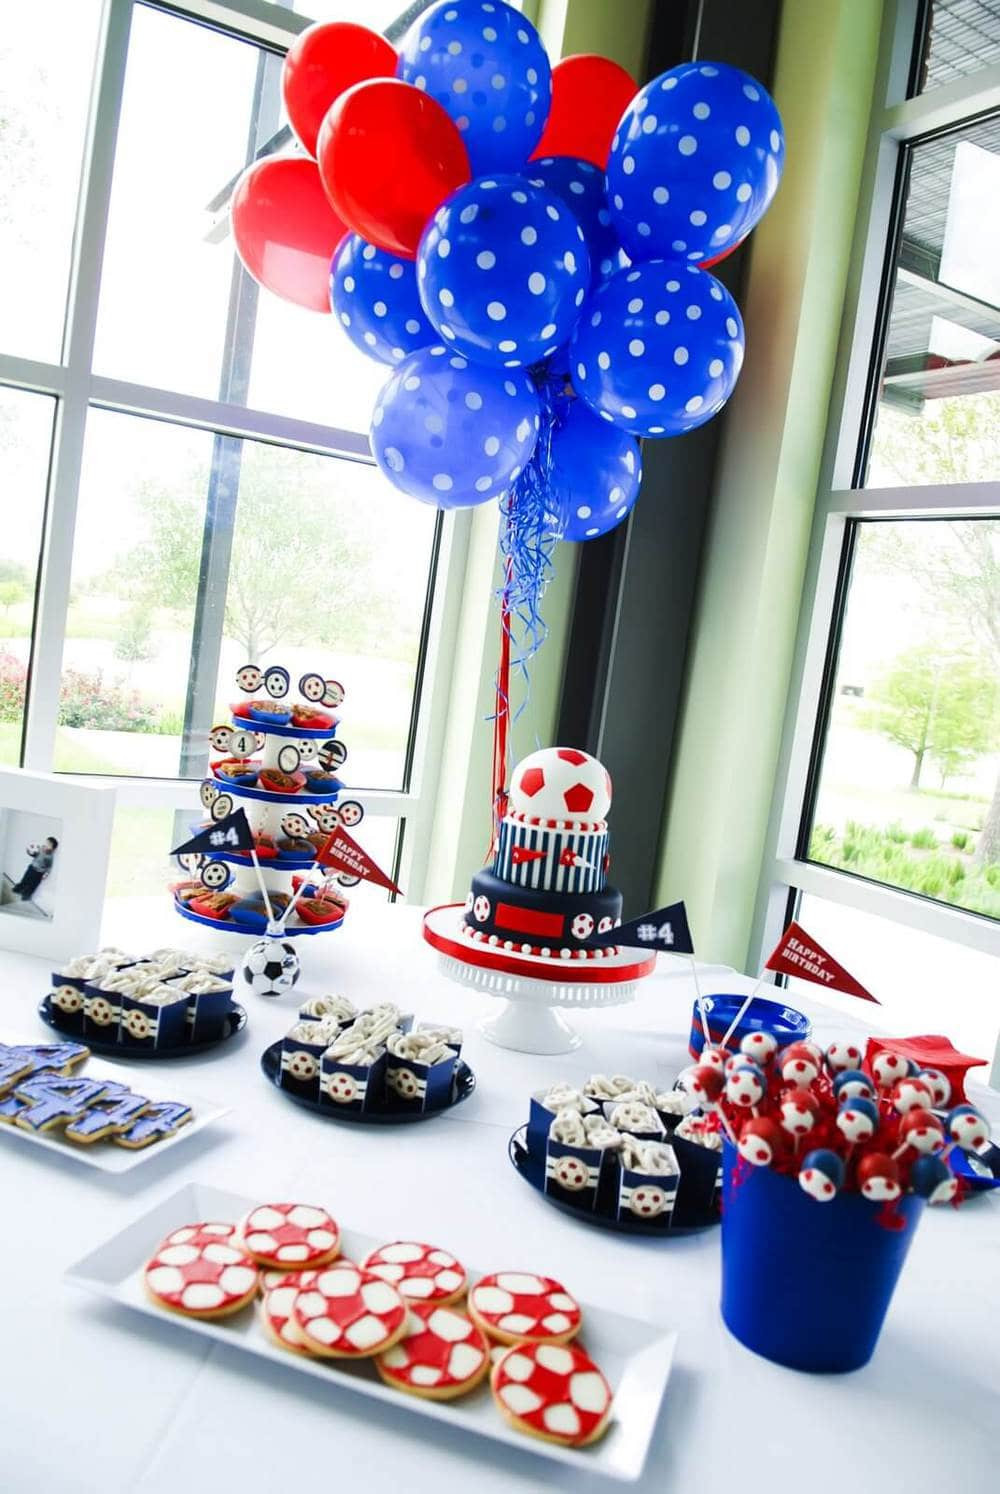 Birthday Party Ideas For 9 Year Old Boy
 50 Awesome Boys Birthday Party Ideas I Heart Naptime